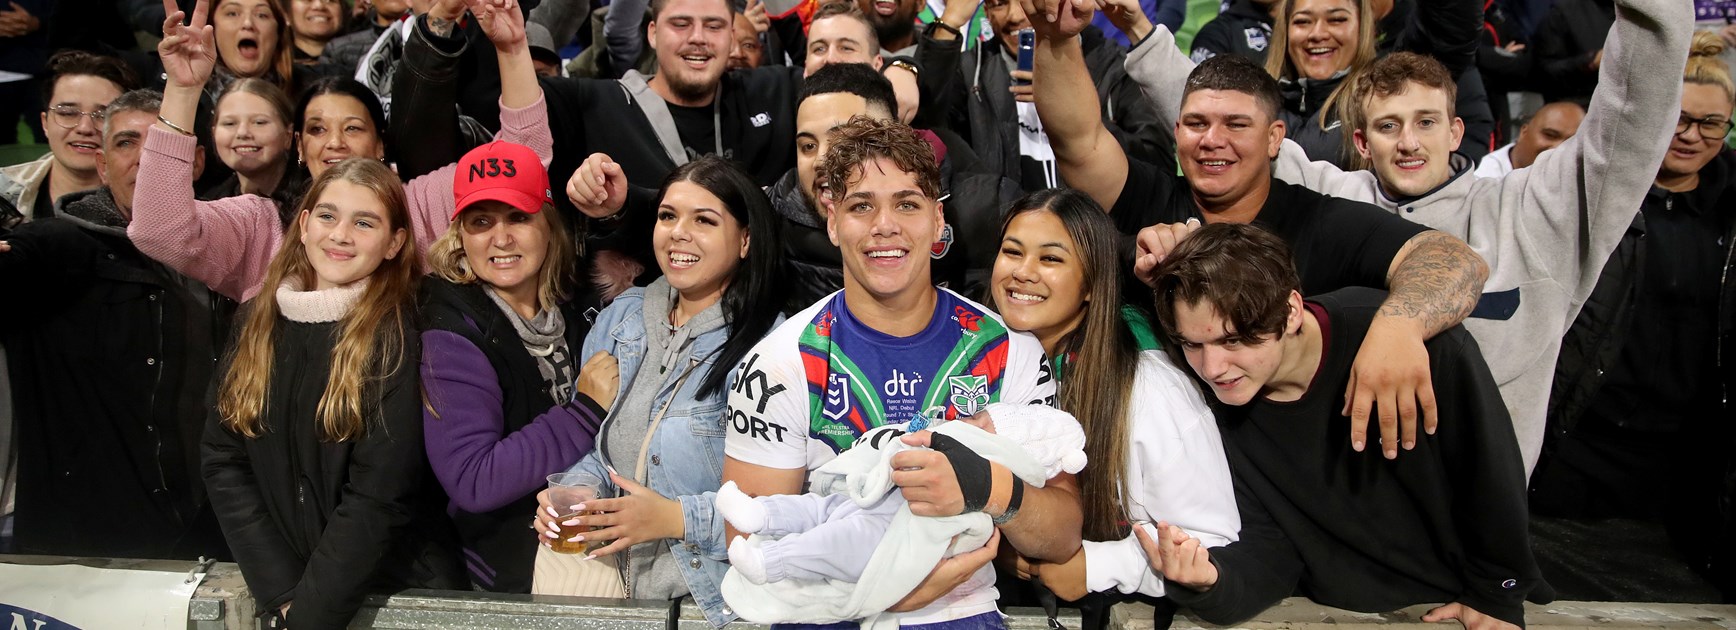 Walsh the Warrior: Family, Walker and footy addiction driving NRL prodigy